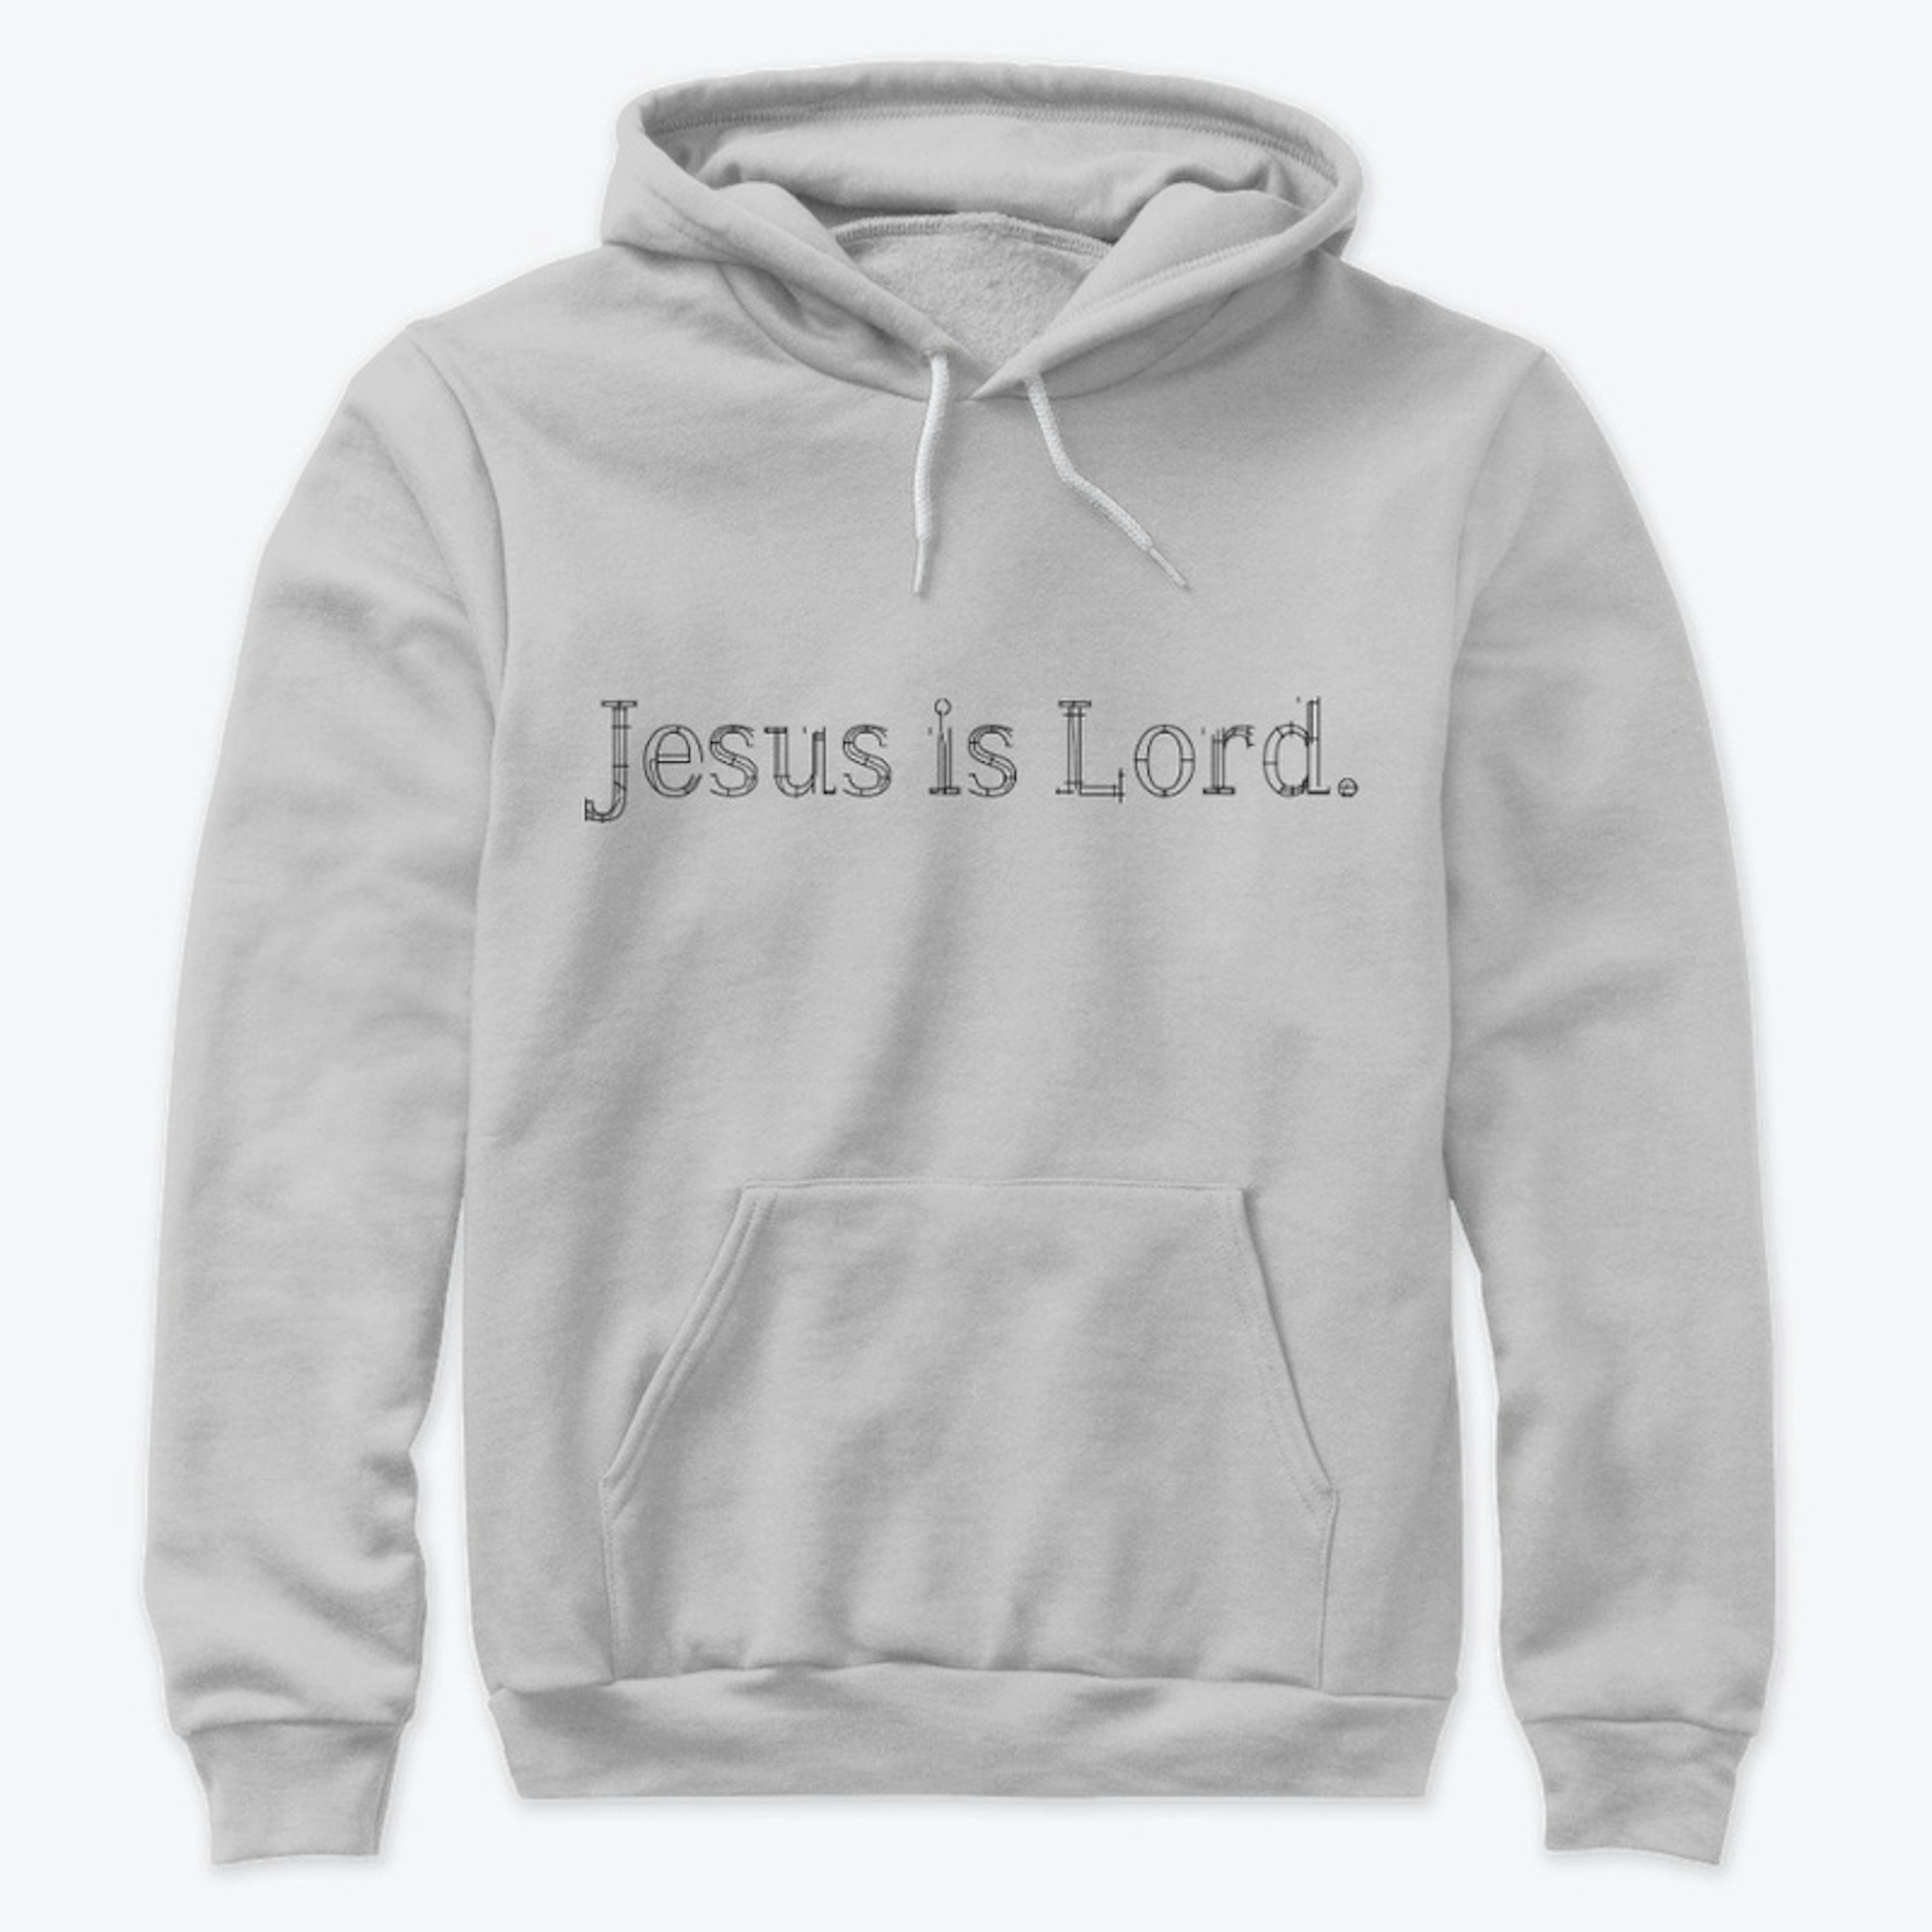 Jesus is Lord.